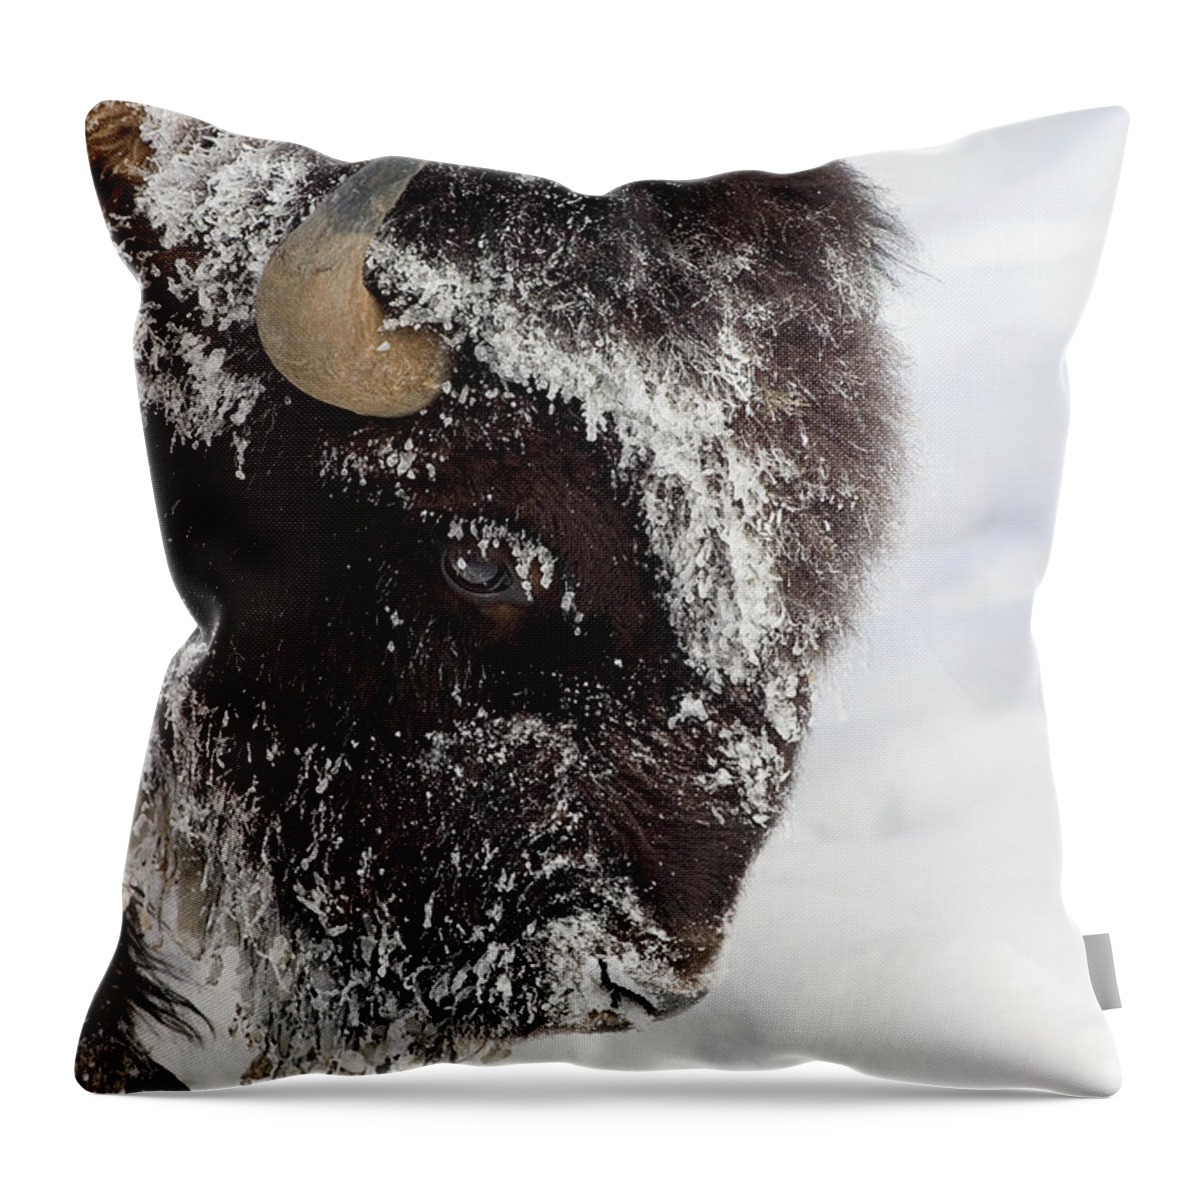 Horned Throw Pillow featuring the photograph Buffalo In Winter In Yellowstone by J. L. woody Wooden